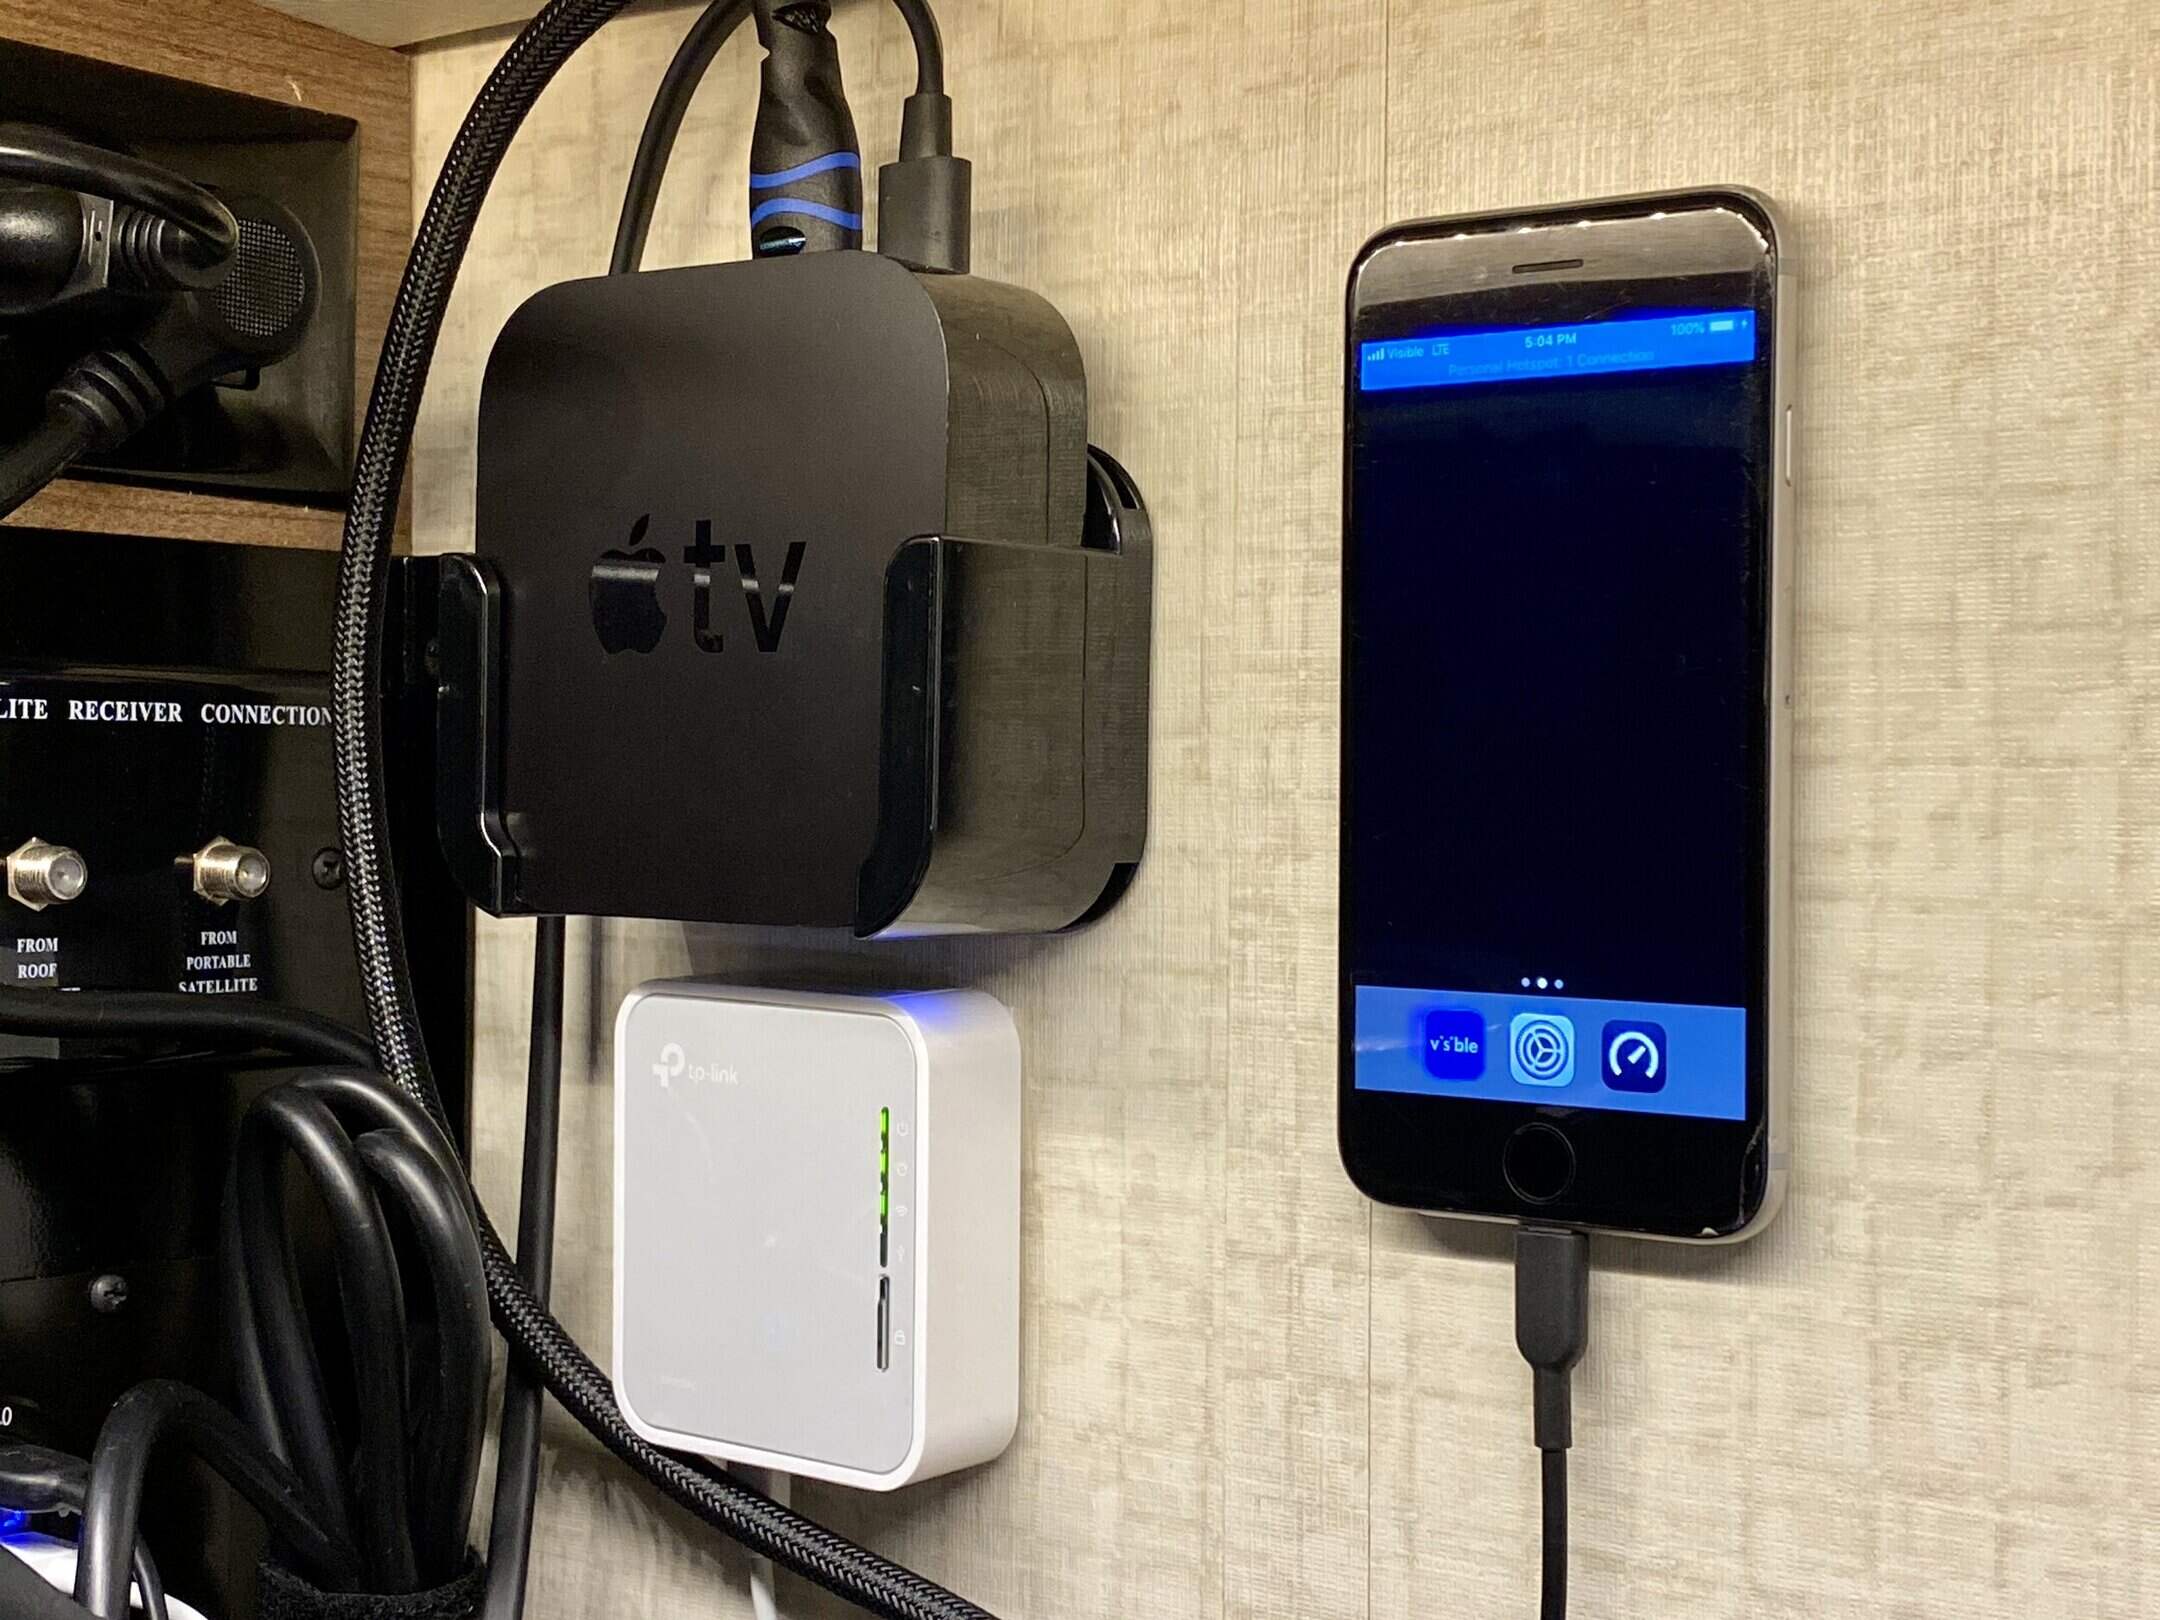 How To Connect A Mobile Hotspot To A Wi-Fi Router